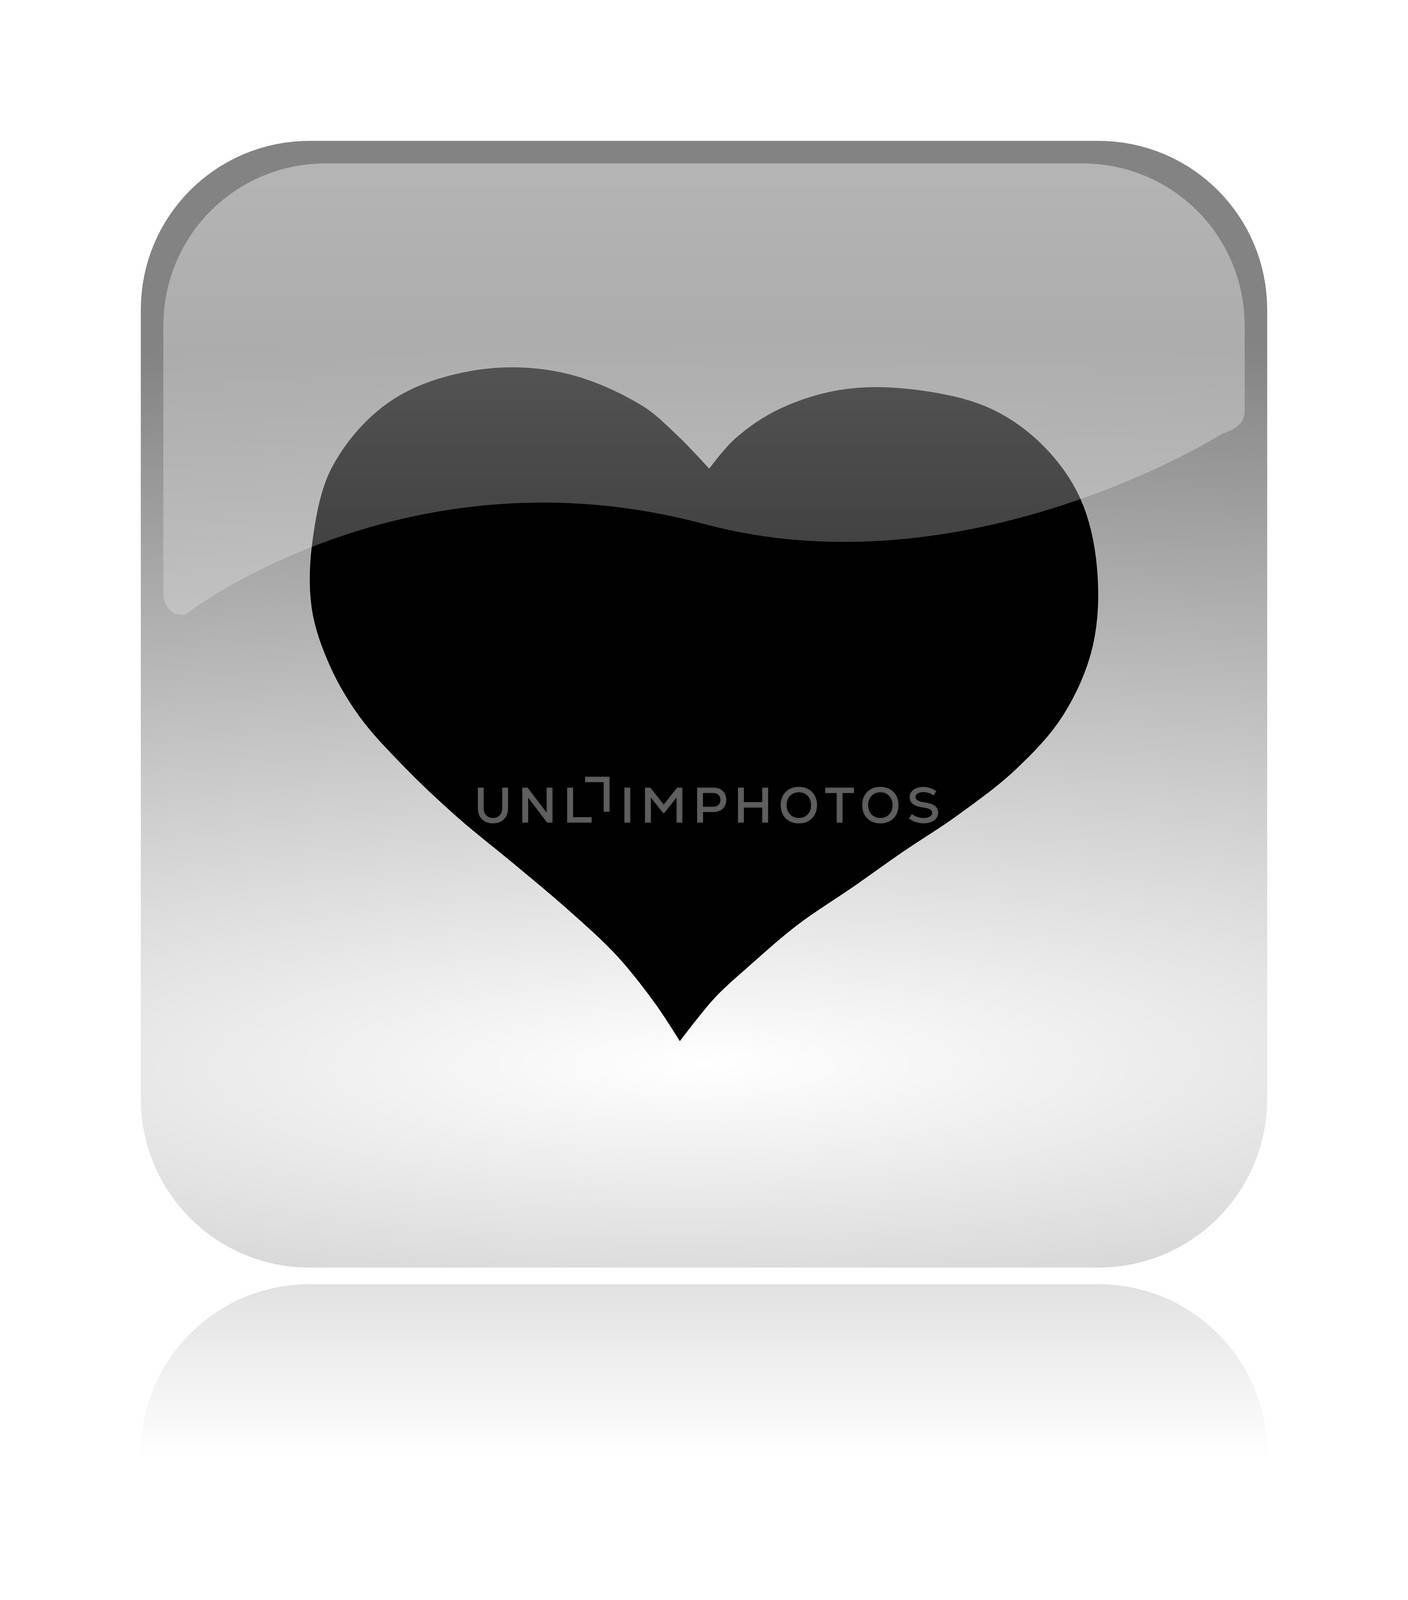 Heart App Rounded Square Icon with Reflection Illustration Isolated on White Background